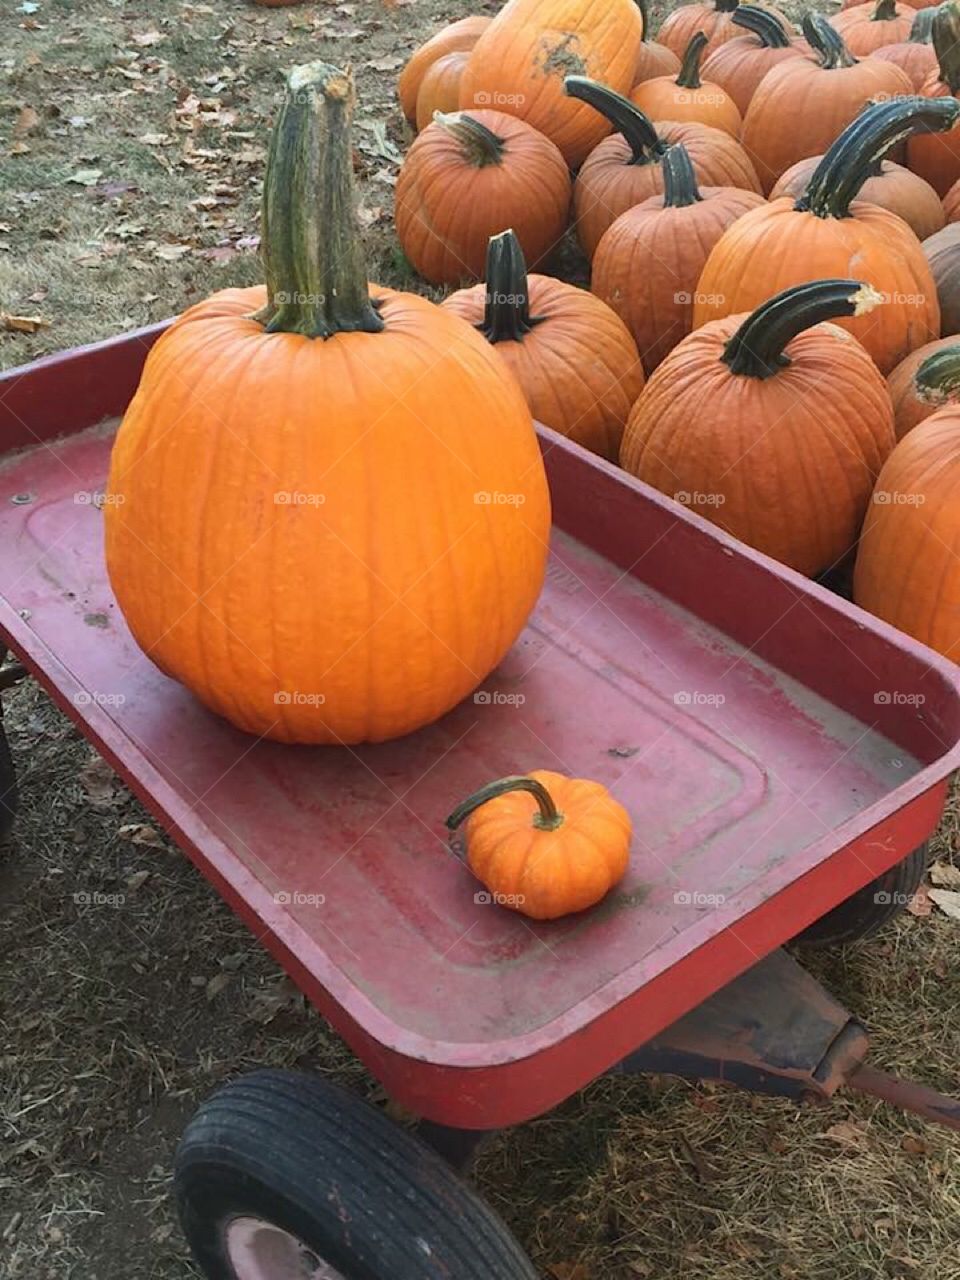 Pumpkins in a red wagon 